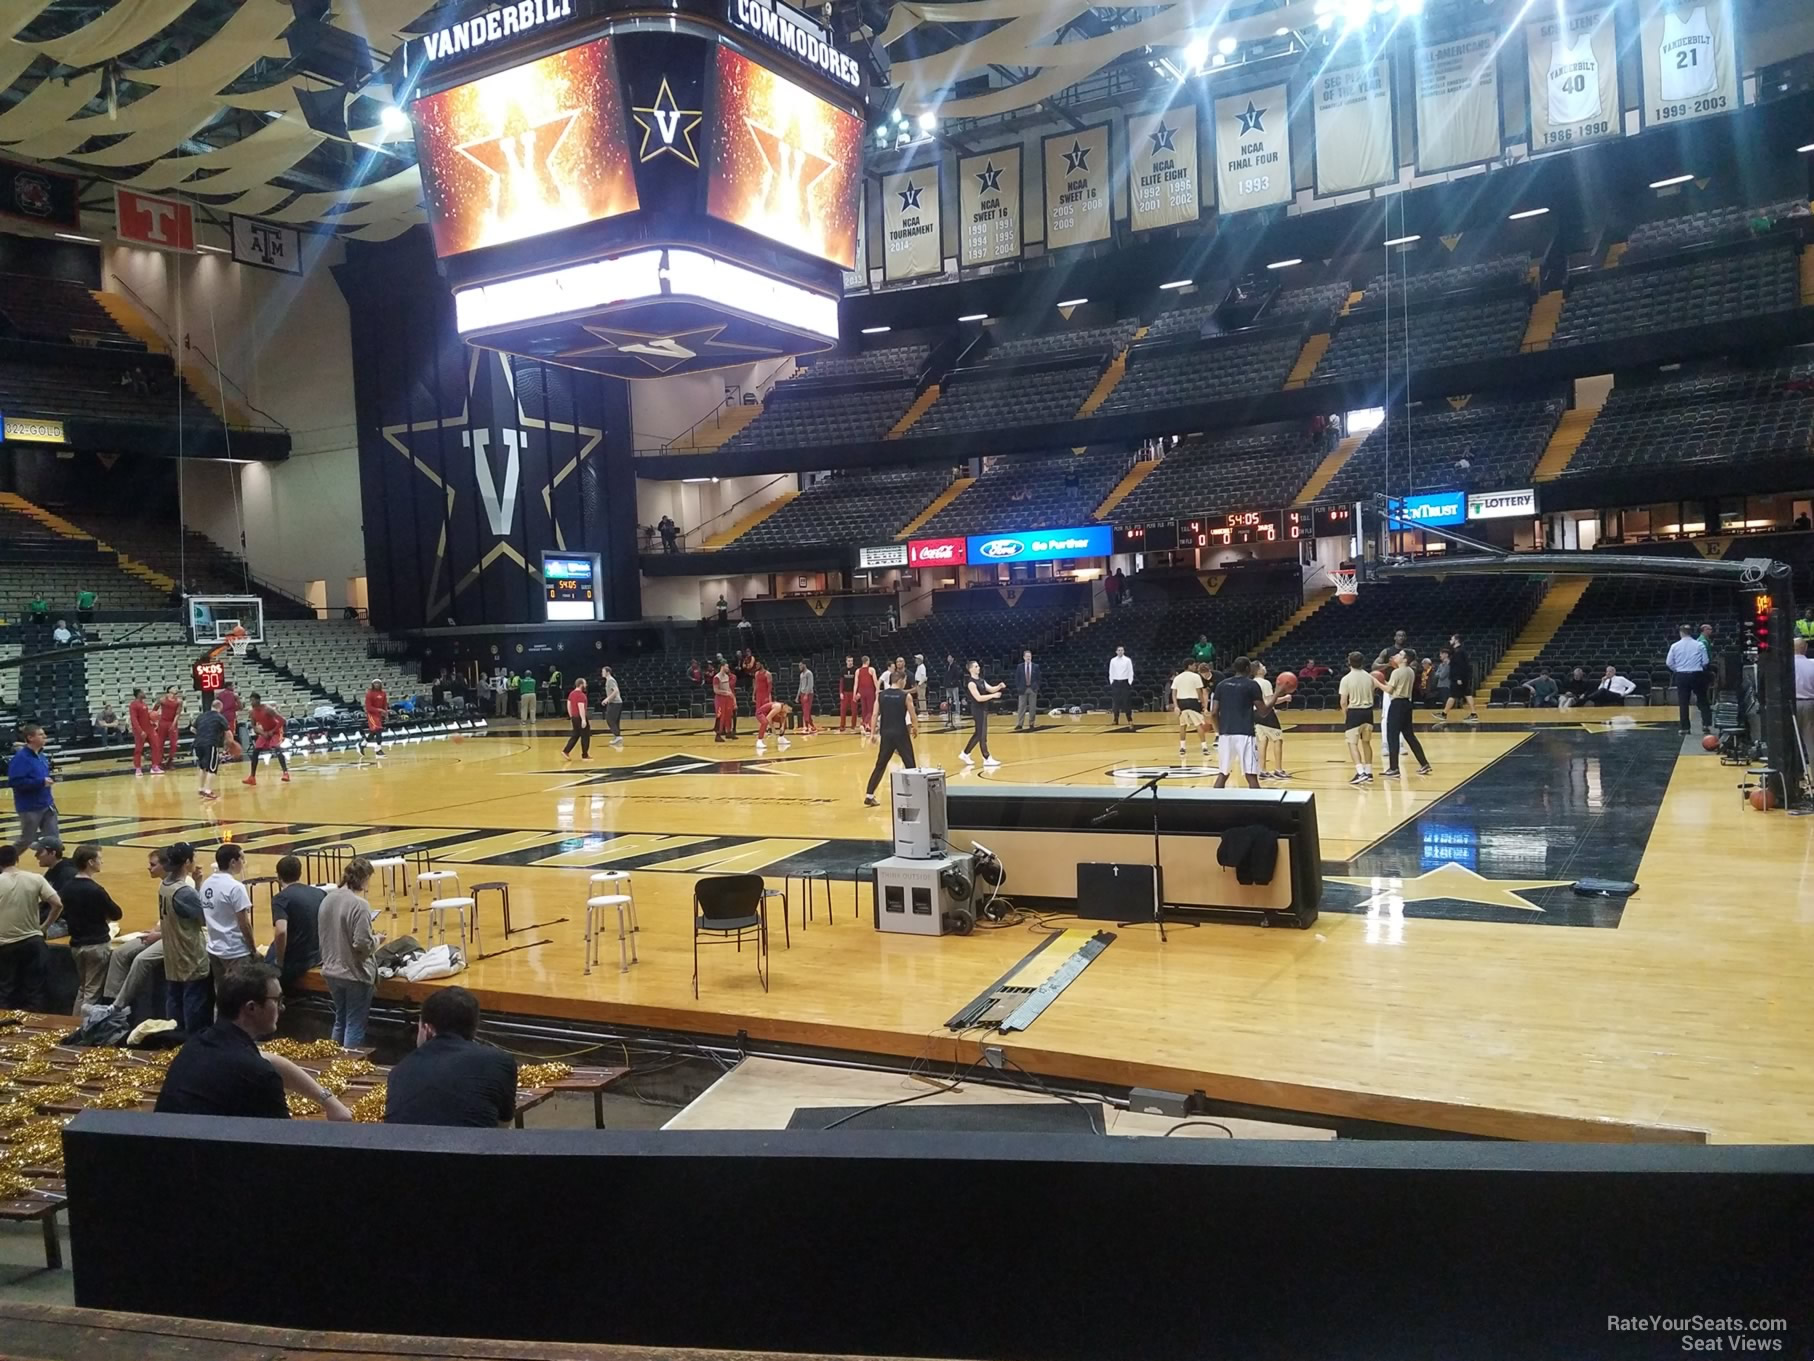 section g, row 15 seat view  - memorial gymnasium